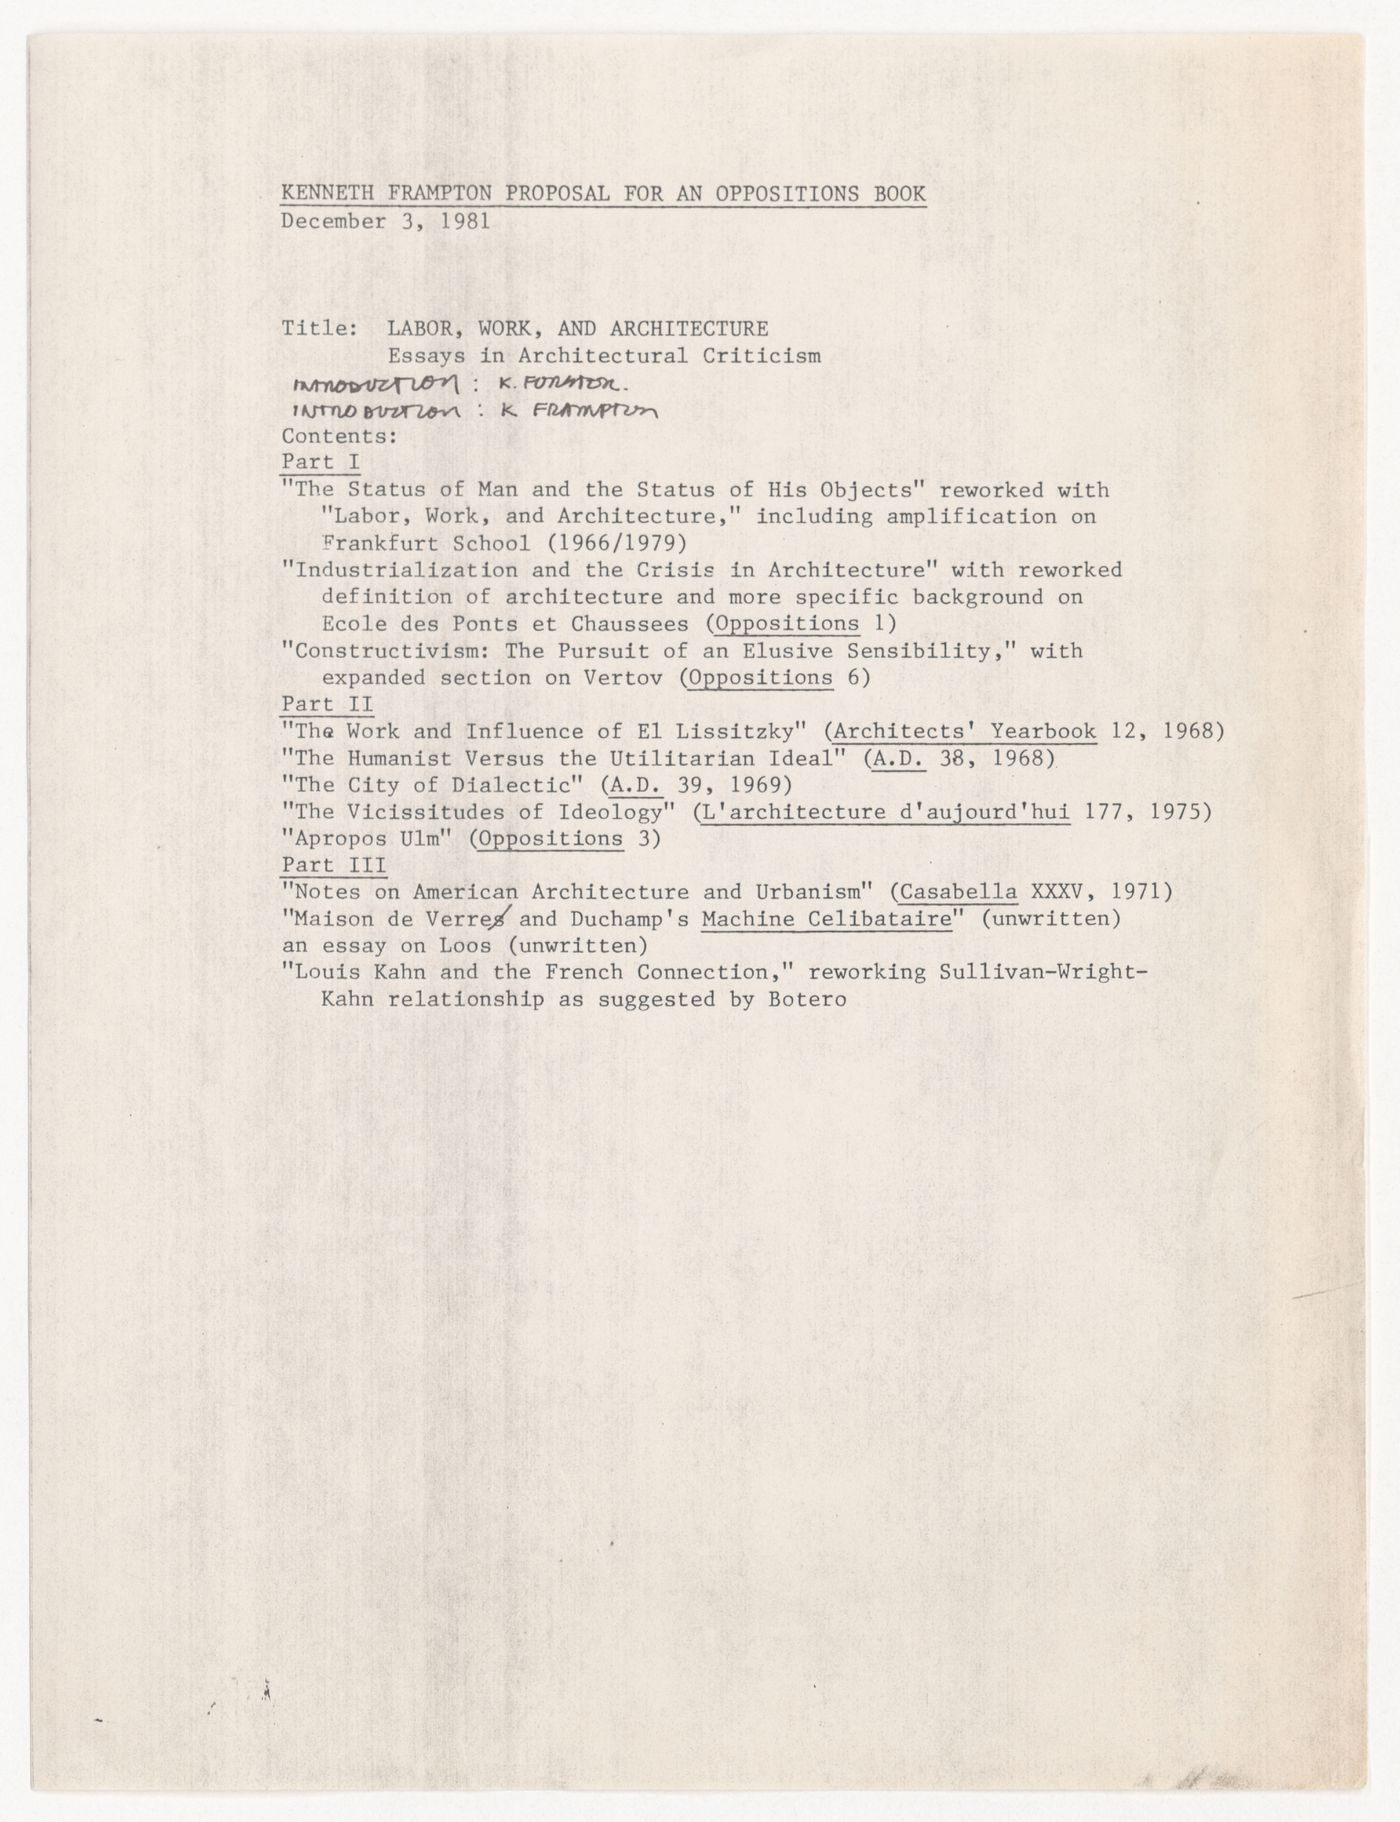 Kenneth Frampton proposal for an Oppositions Book with annotations by Peter D. Eisenman